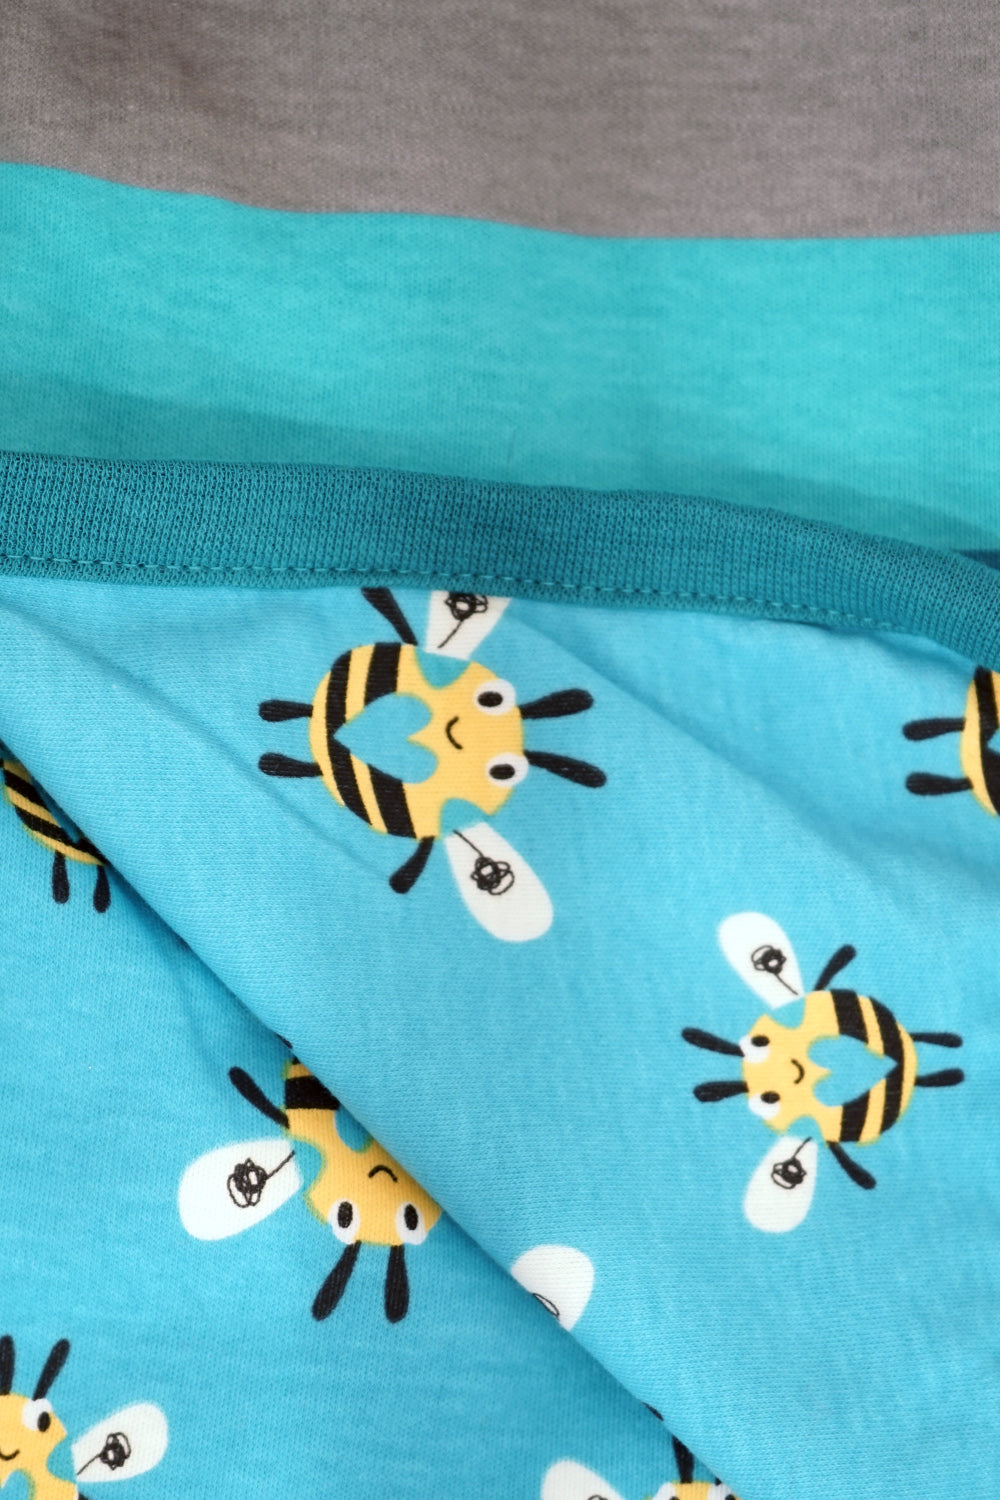 Buzzy Bee Blanket Outlet